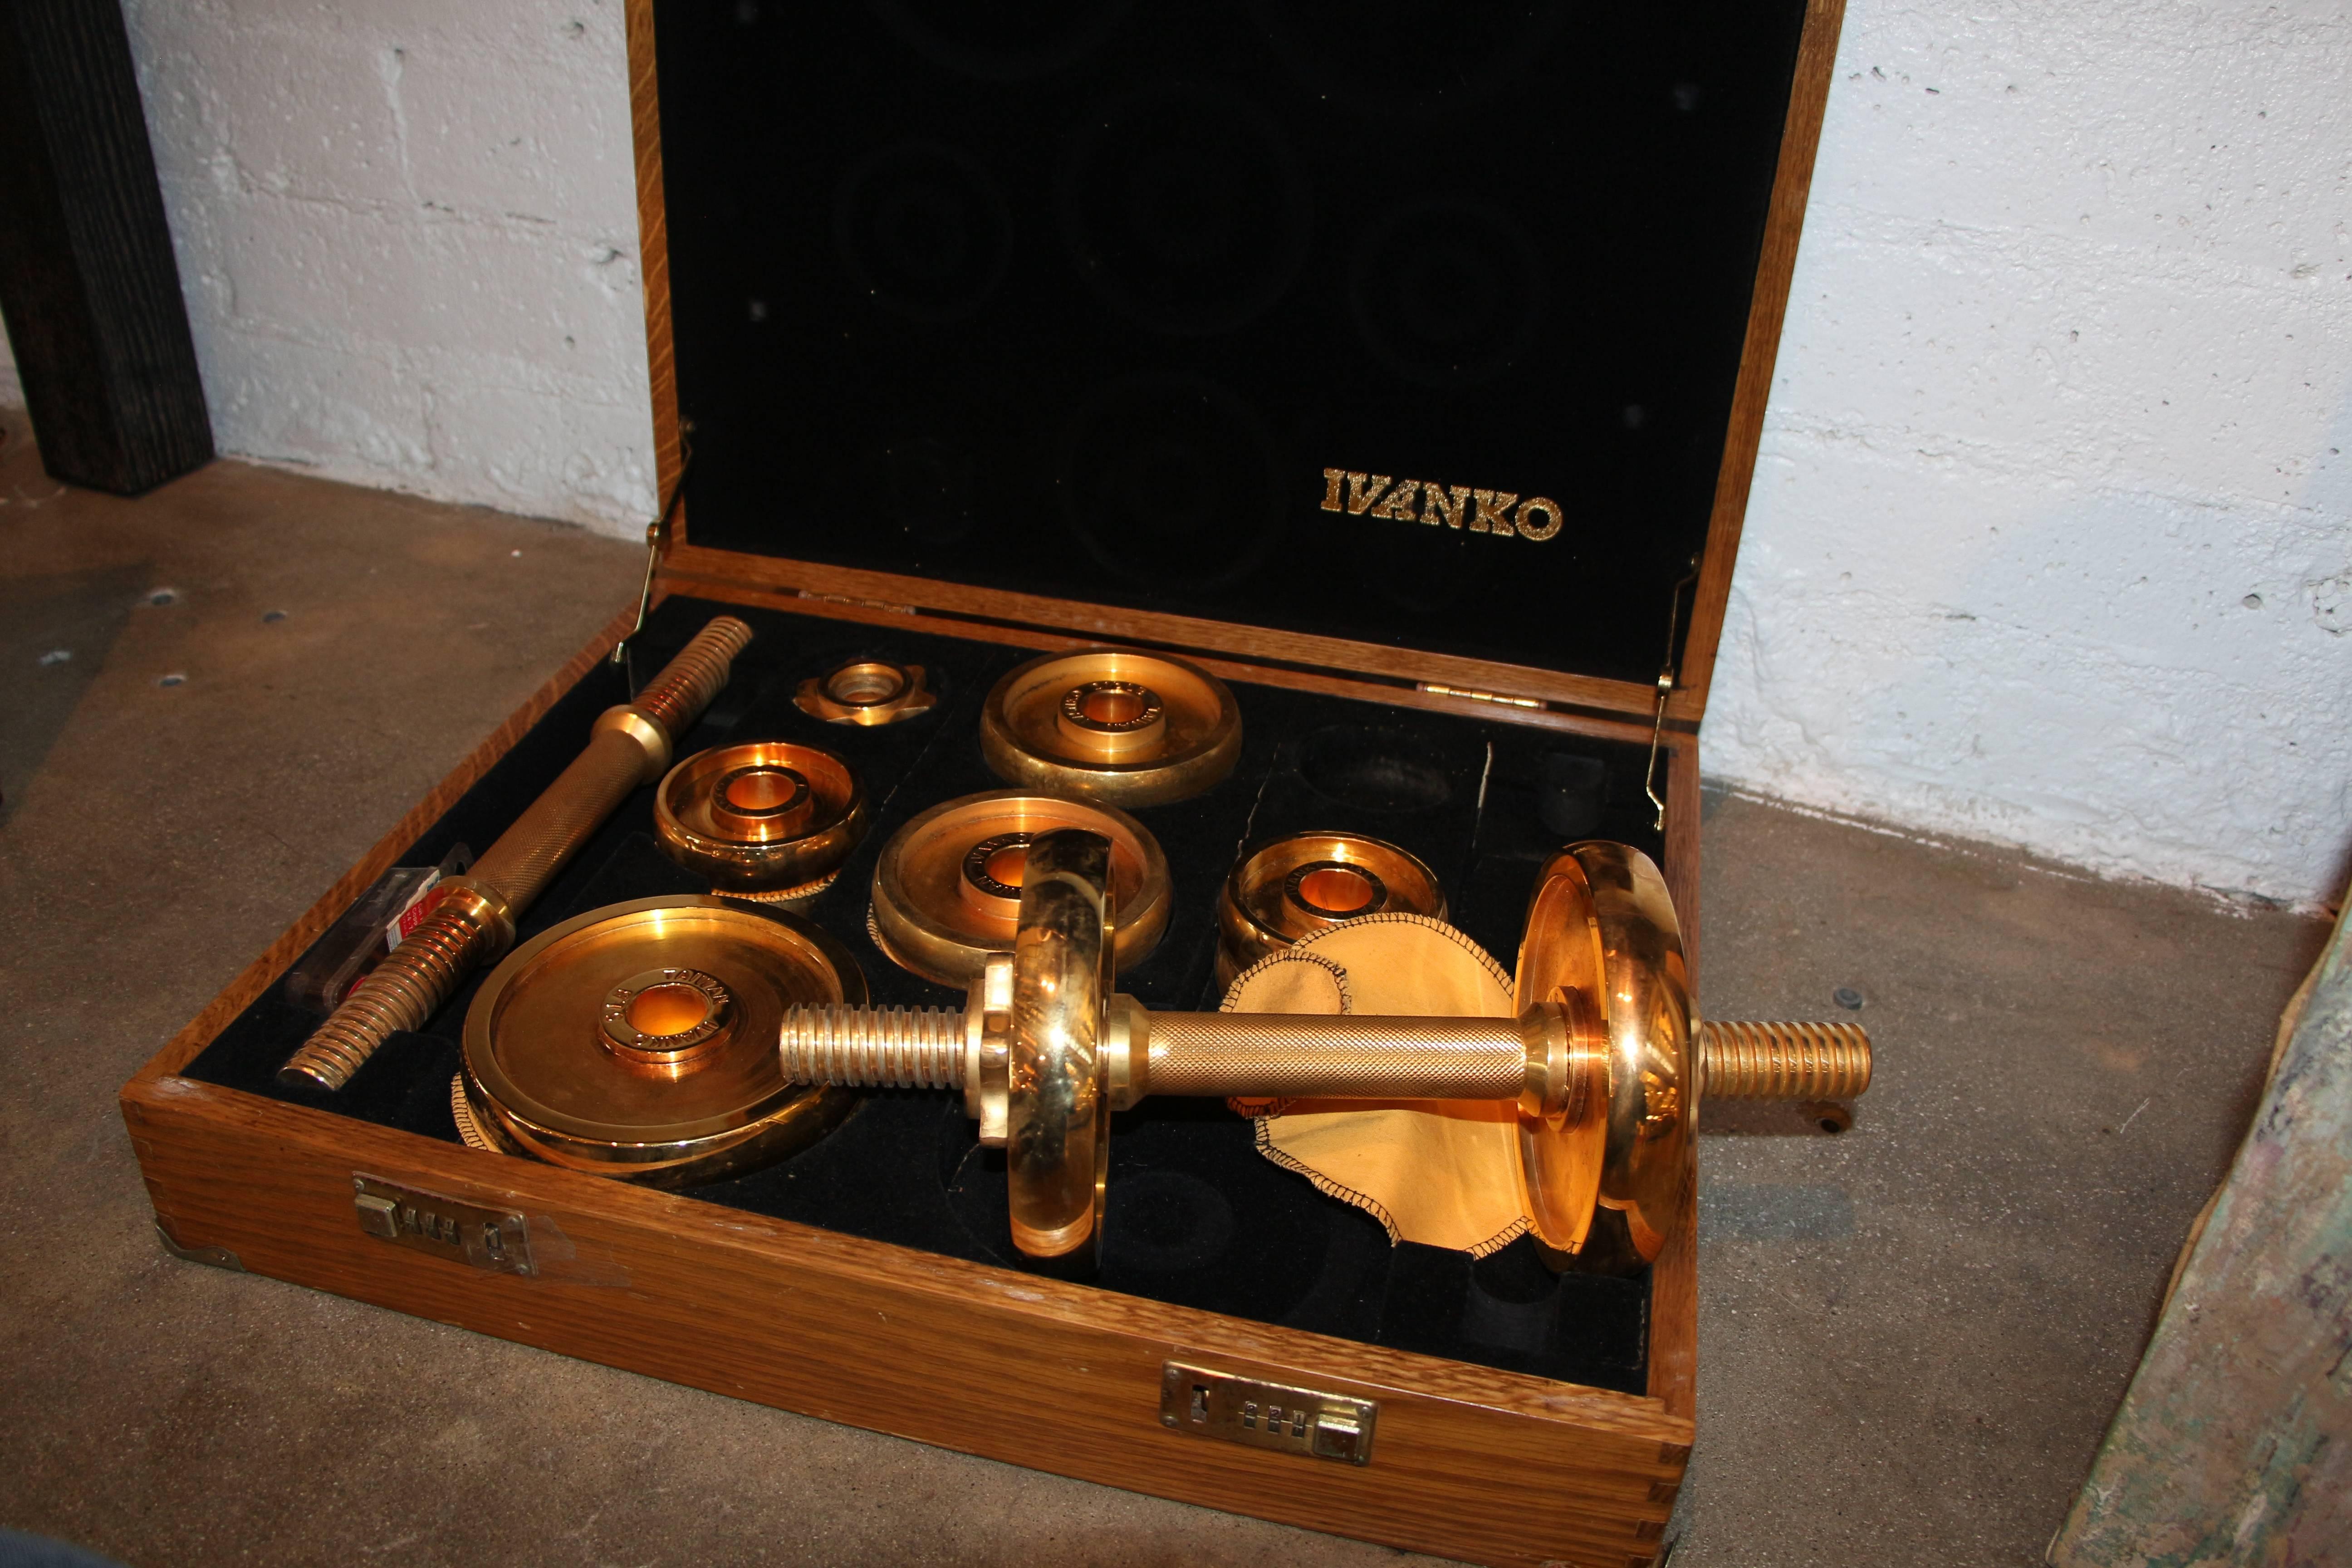 A limited edited Ivanko weight set plated in 22-karat gold made in a limited run in the early 1980s. There are 4 5 pound weights 4 2.5 weights, 4 1.25 pound weights, holders and barbells. The box is a little rough and the locks stick although they